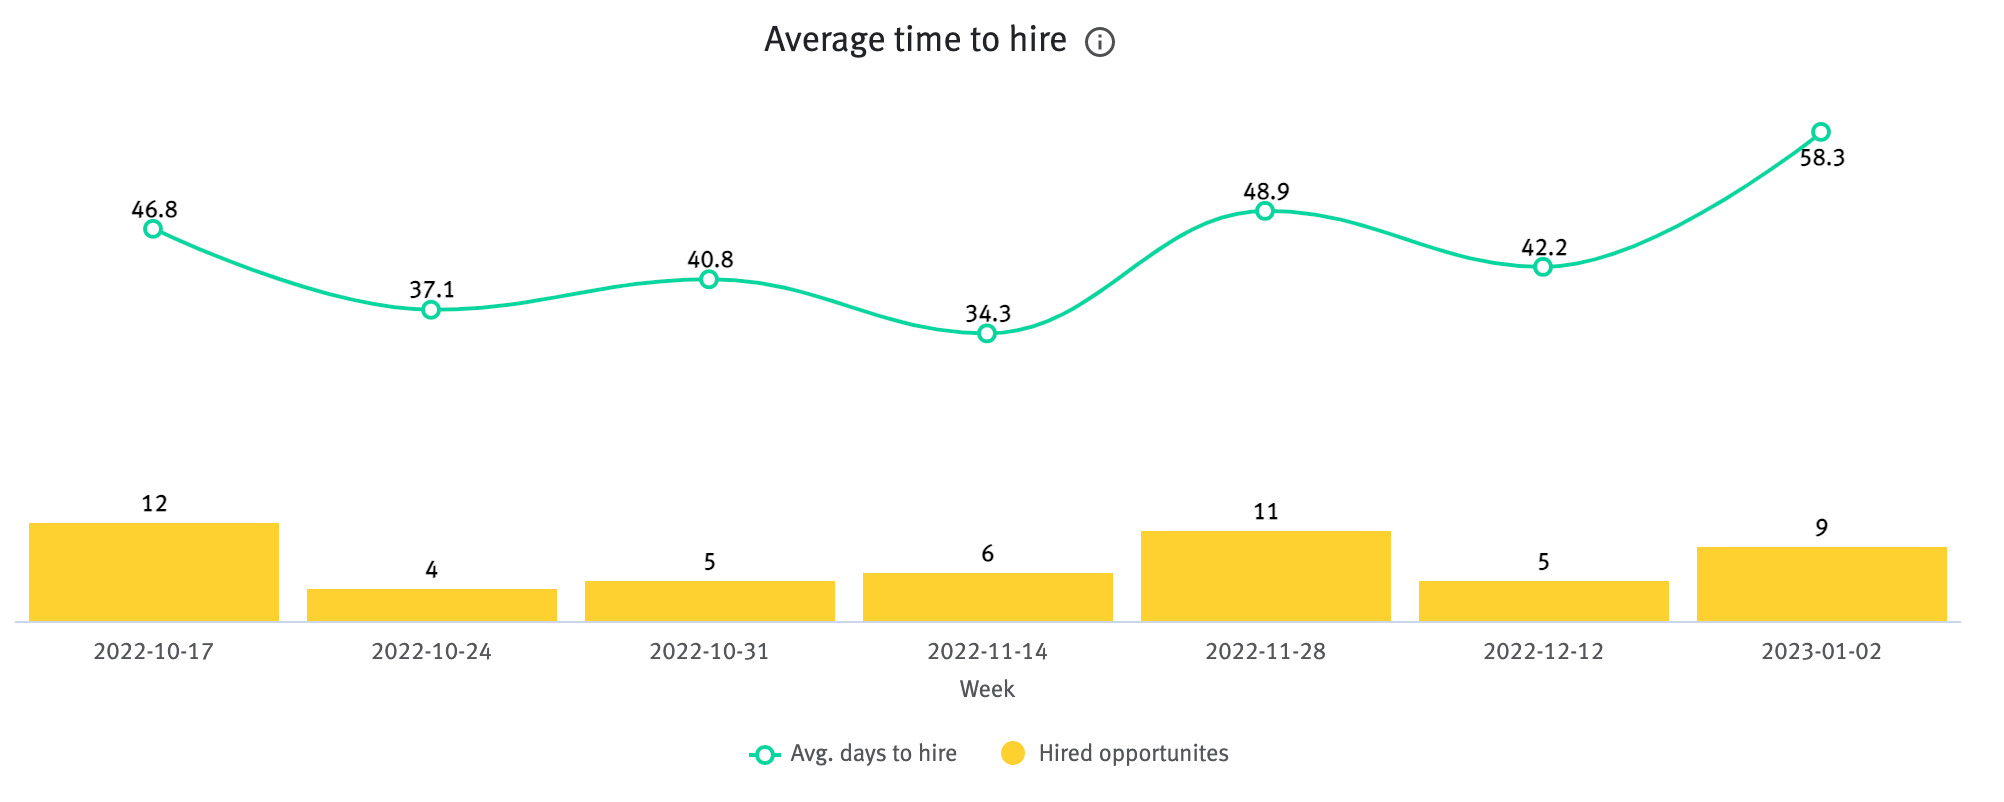 Average time to hire chart